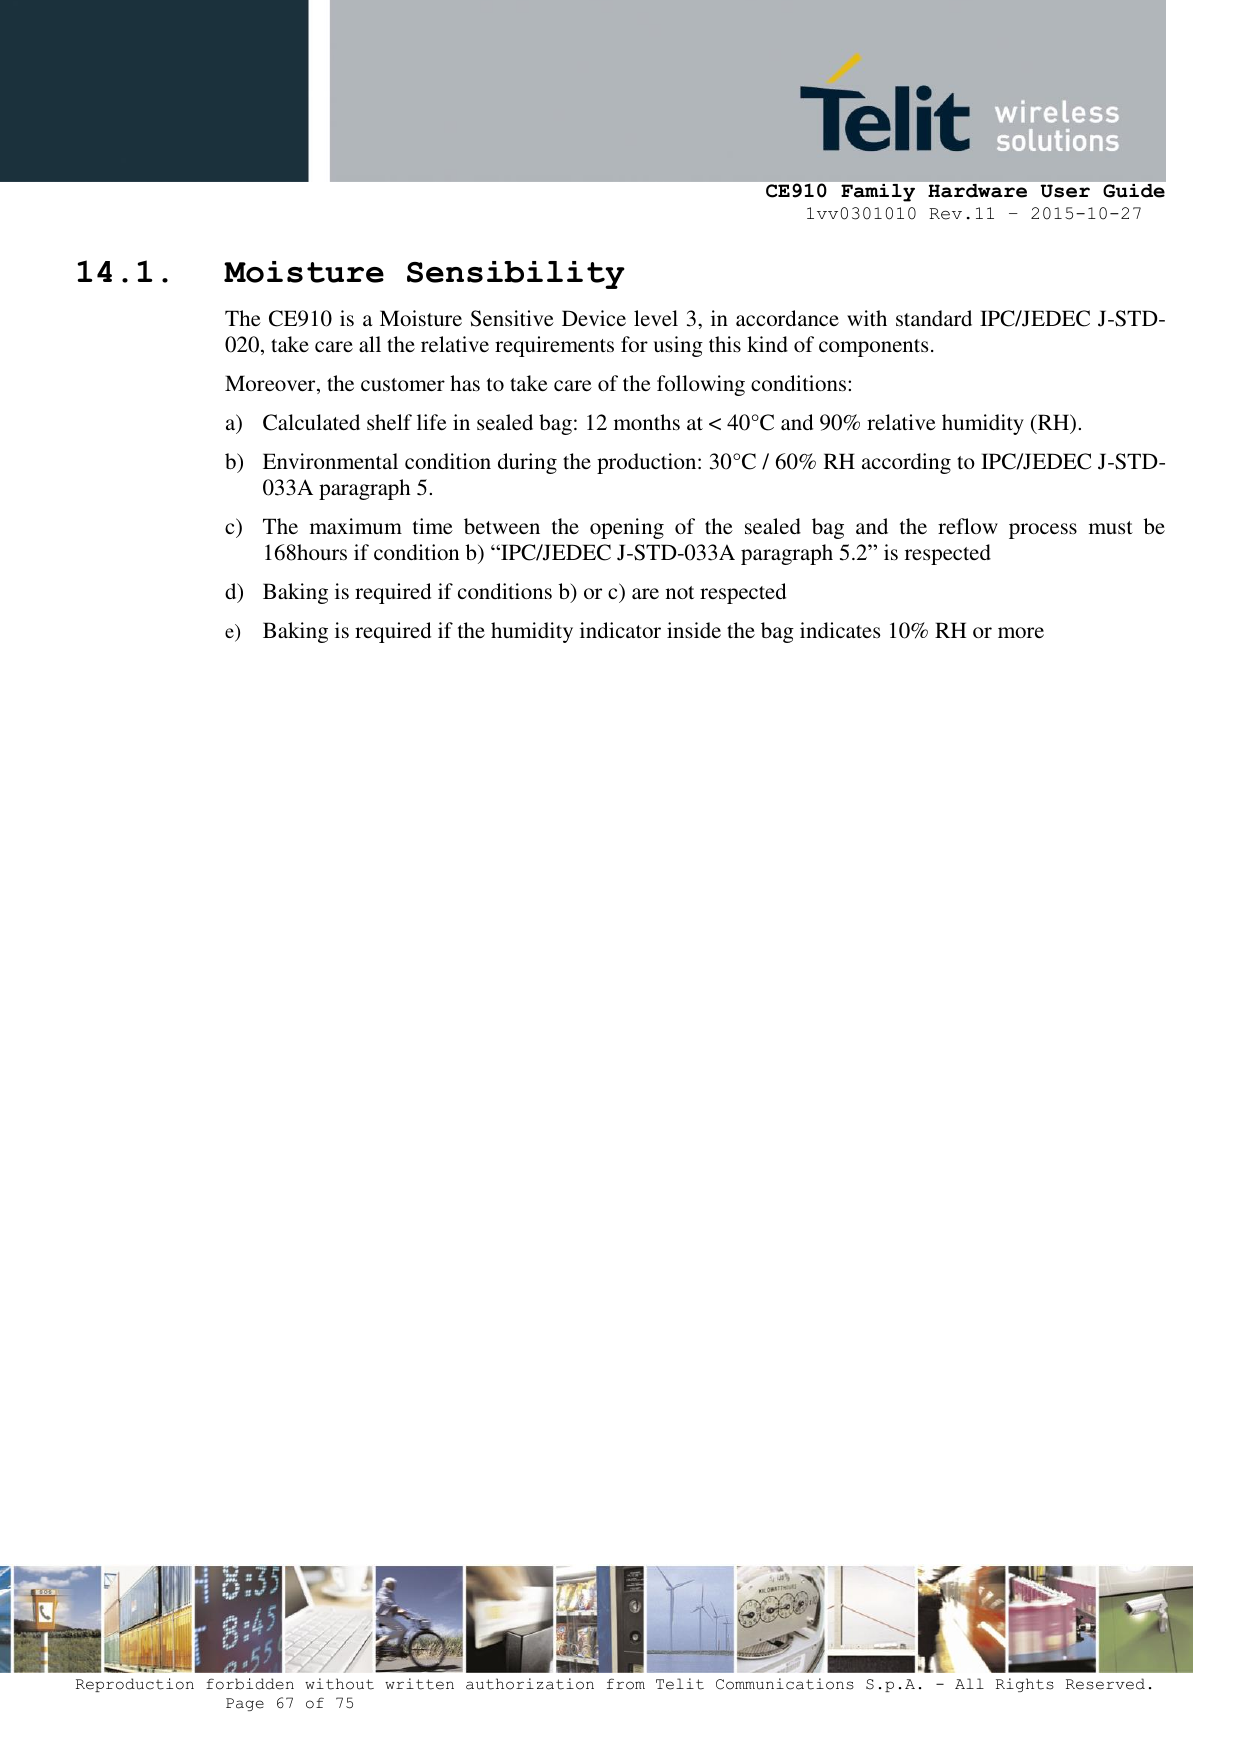     CE910 Family Hardware User Guide 1vv0301010 Rev.11 – 2015-10-27 Reproduction forbidden without written authorization from Telit Communications S.p.A. - All Rights Reserved.    Page 67 of 75                                                     14.1. Moisture Sensibility The CE910 is a Moisture Sensitive Device level 3, in accordance with standard IPC/JEDEC J-STD-020, take care all the relative requirements for using this kind of components. Moreover, the customer has to take care of the following conditions: a) Calculated shelf life in sealed bag: 12 months at &lt; 40°C and 90% relative humidity (RH). b) Environmental condition during the production: 30°C / 60% RH according to IPC/JEDEC J-STD-033A paragraph 5. c) The  maximum  time  between  the  opening  of  the  sealed  bag  and  the  reflow  process  must  be 168hours if condition b) “IPC/JEDEC J-STD-033A paragraph 5.2” is respected d) Baking is required if conditions b) or c) are not respected e) Baking is required if the humidity indicator inside the bag indicates 10% RH or more  